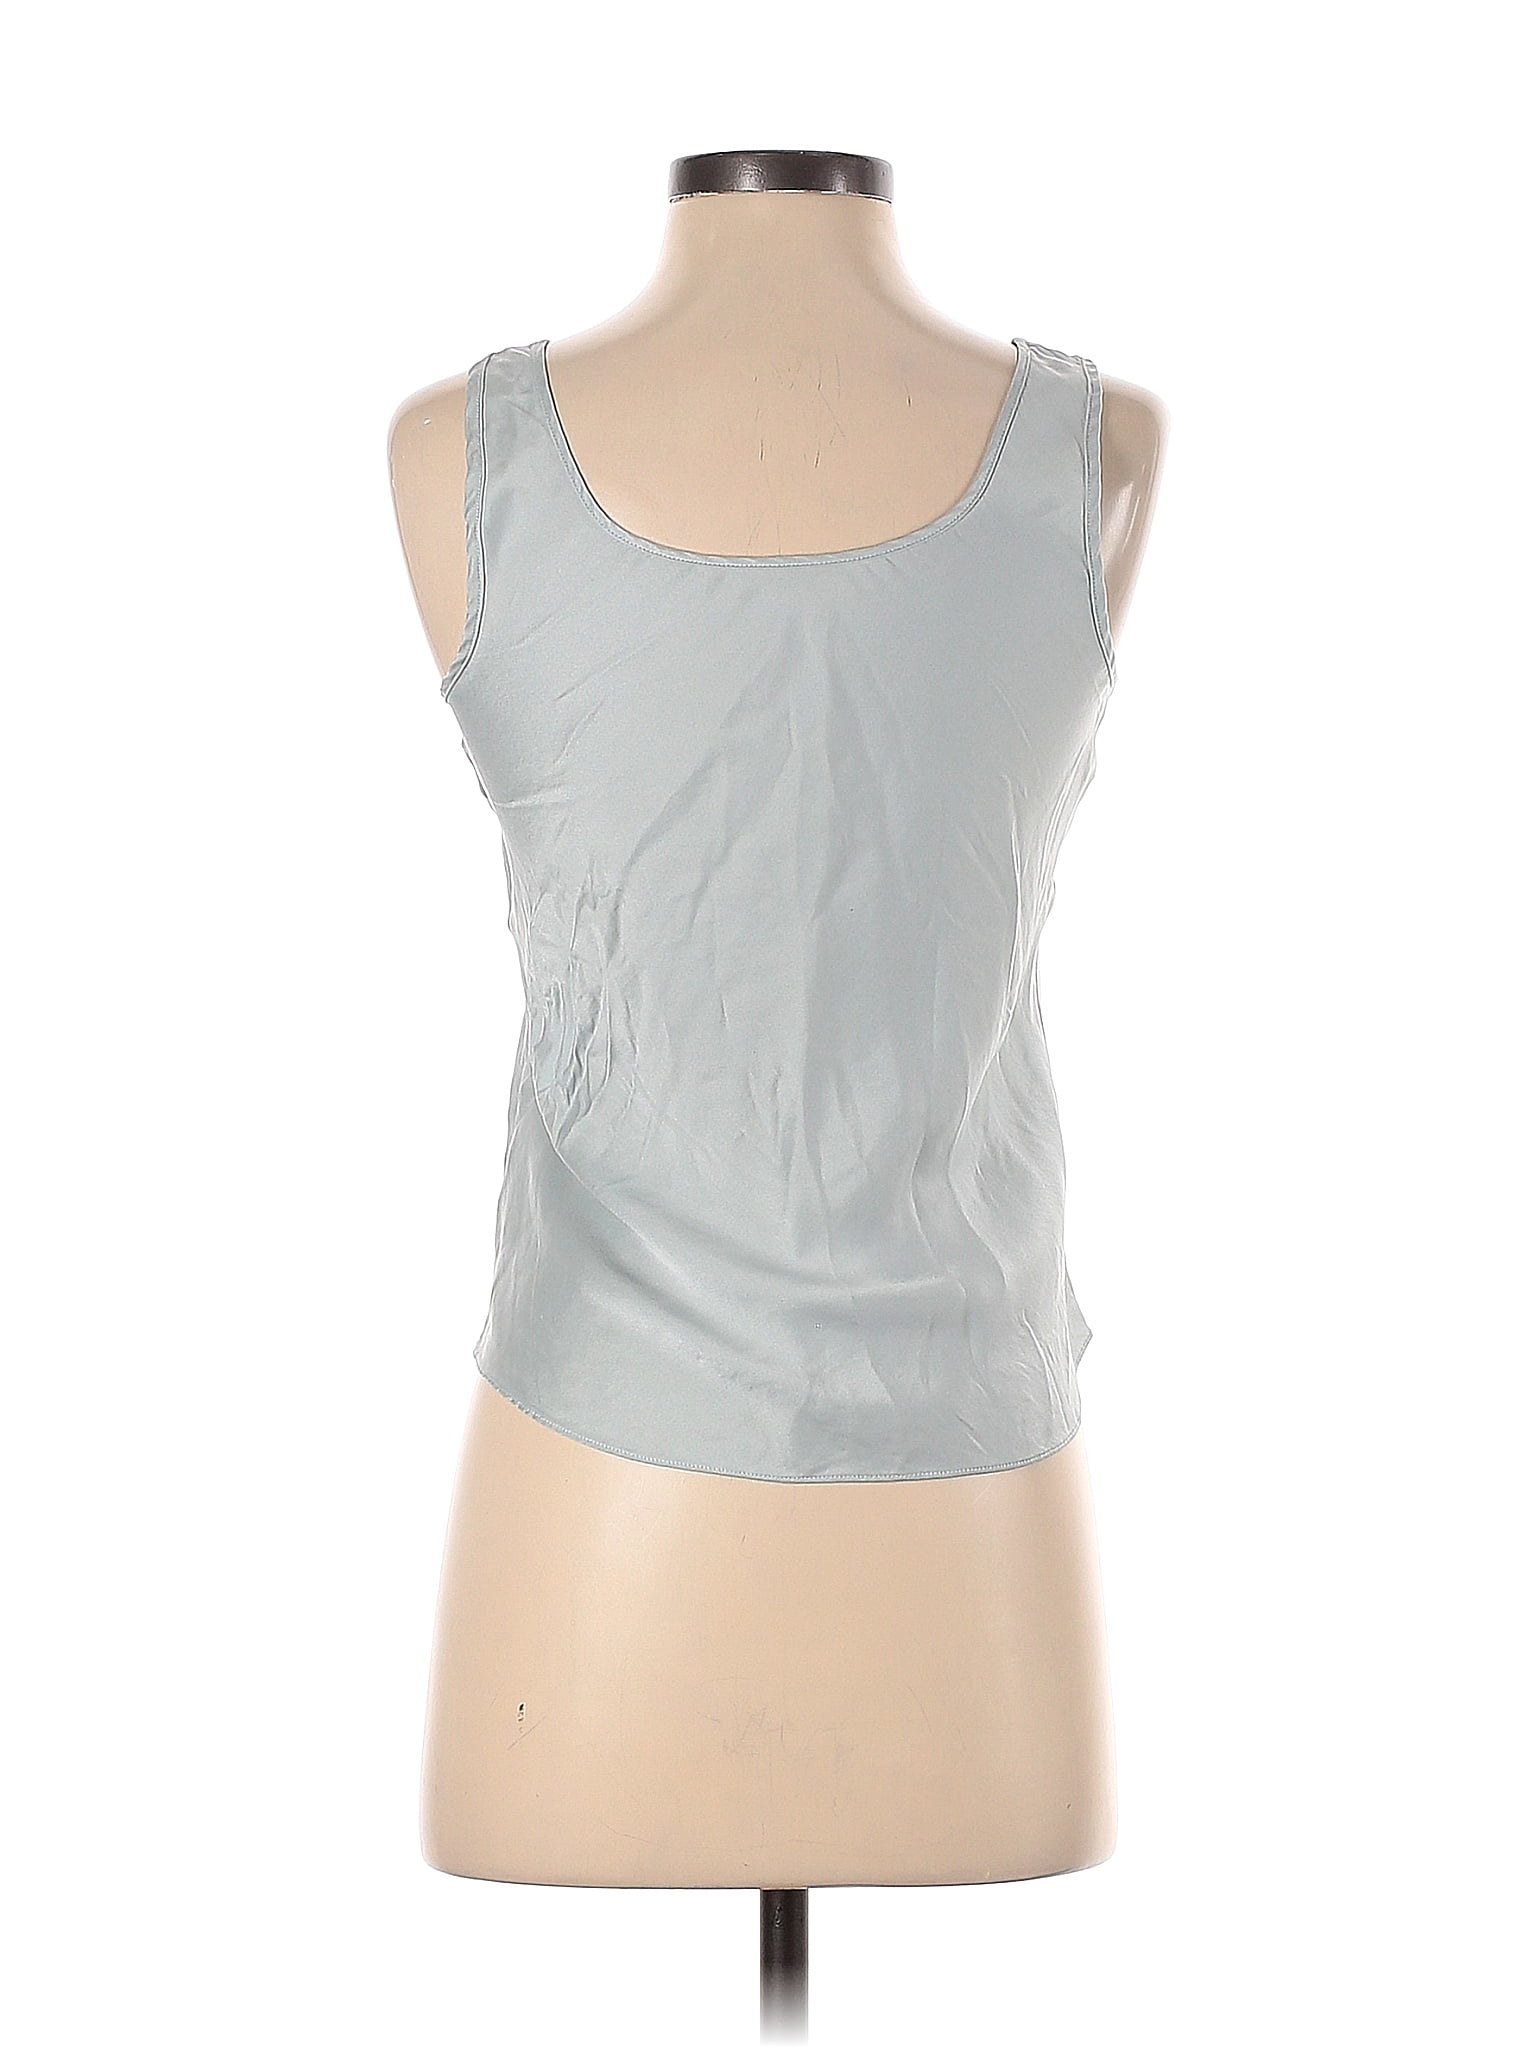 Andie womens The Rio Top, XS 